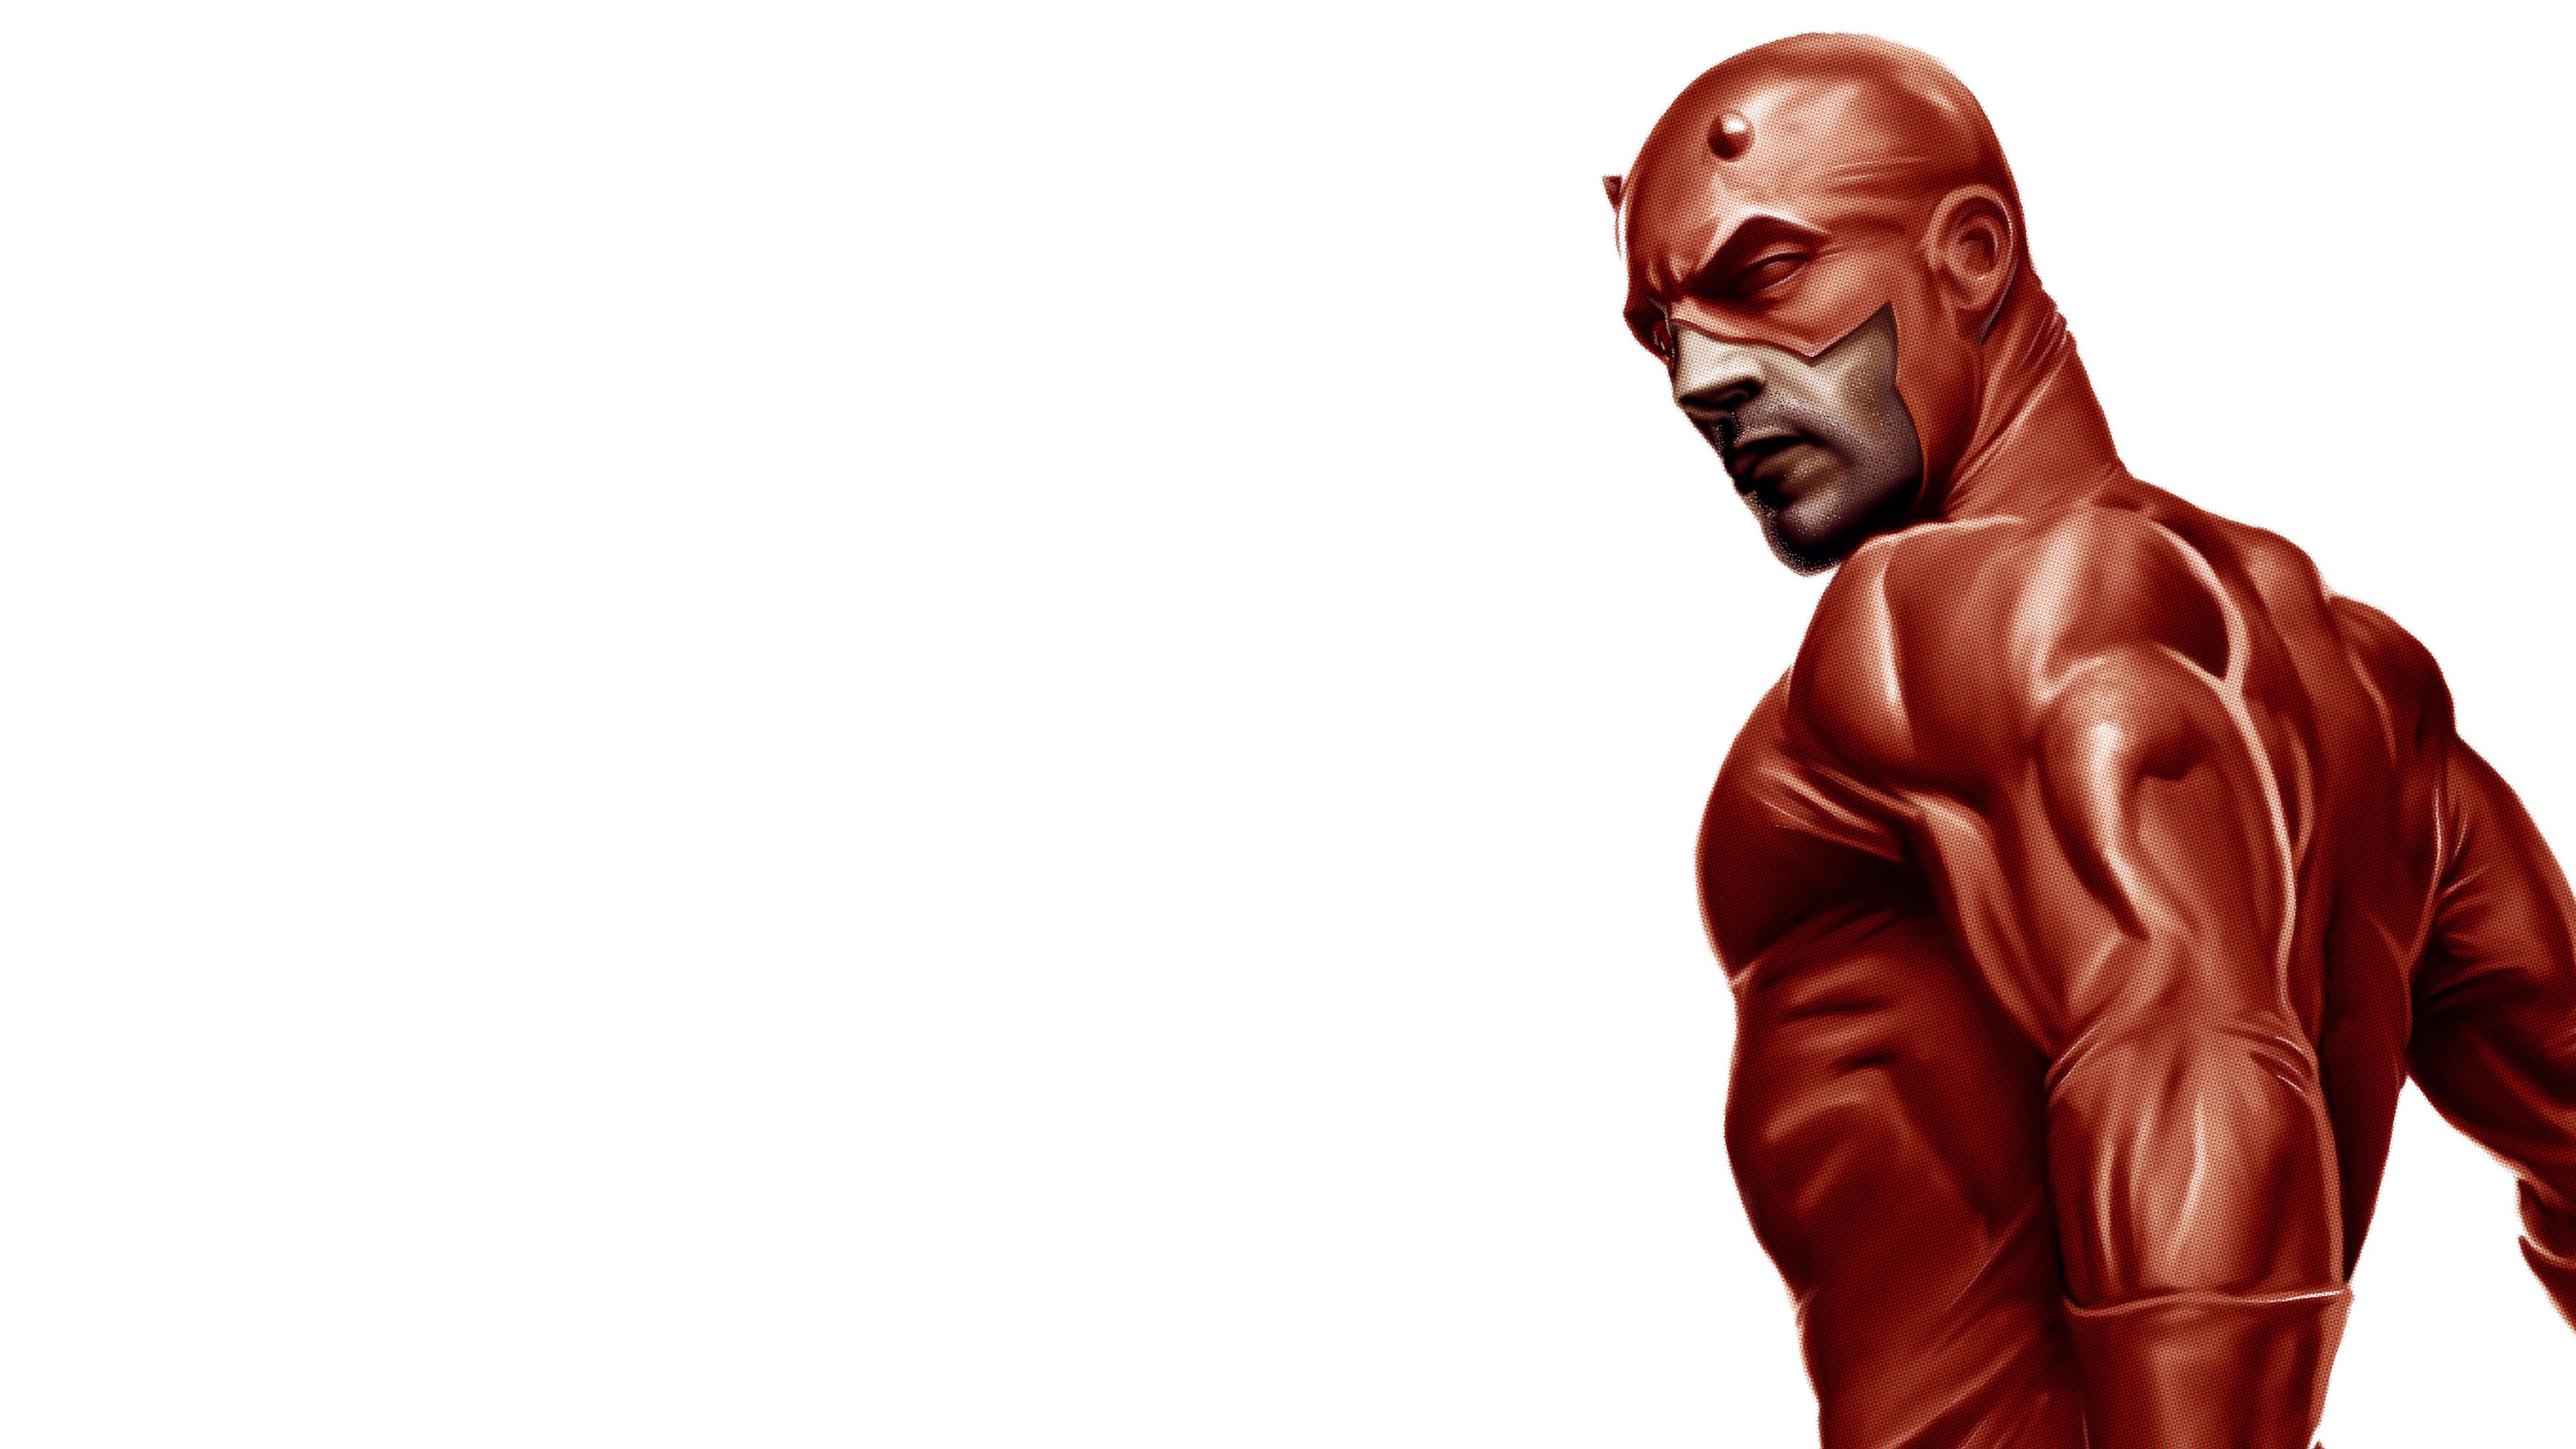 220+ Daredevil HD Wallpapers and Backgrounds